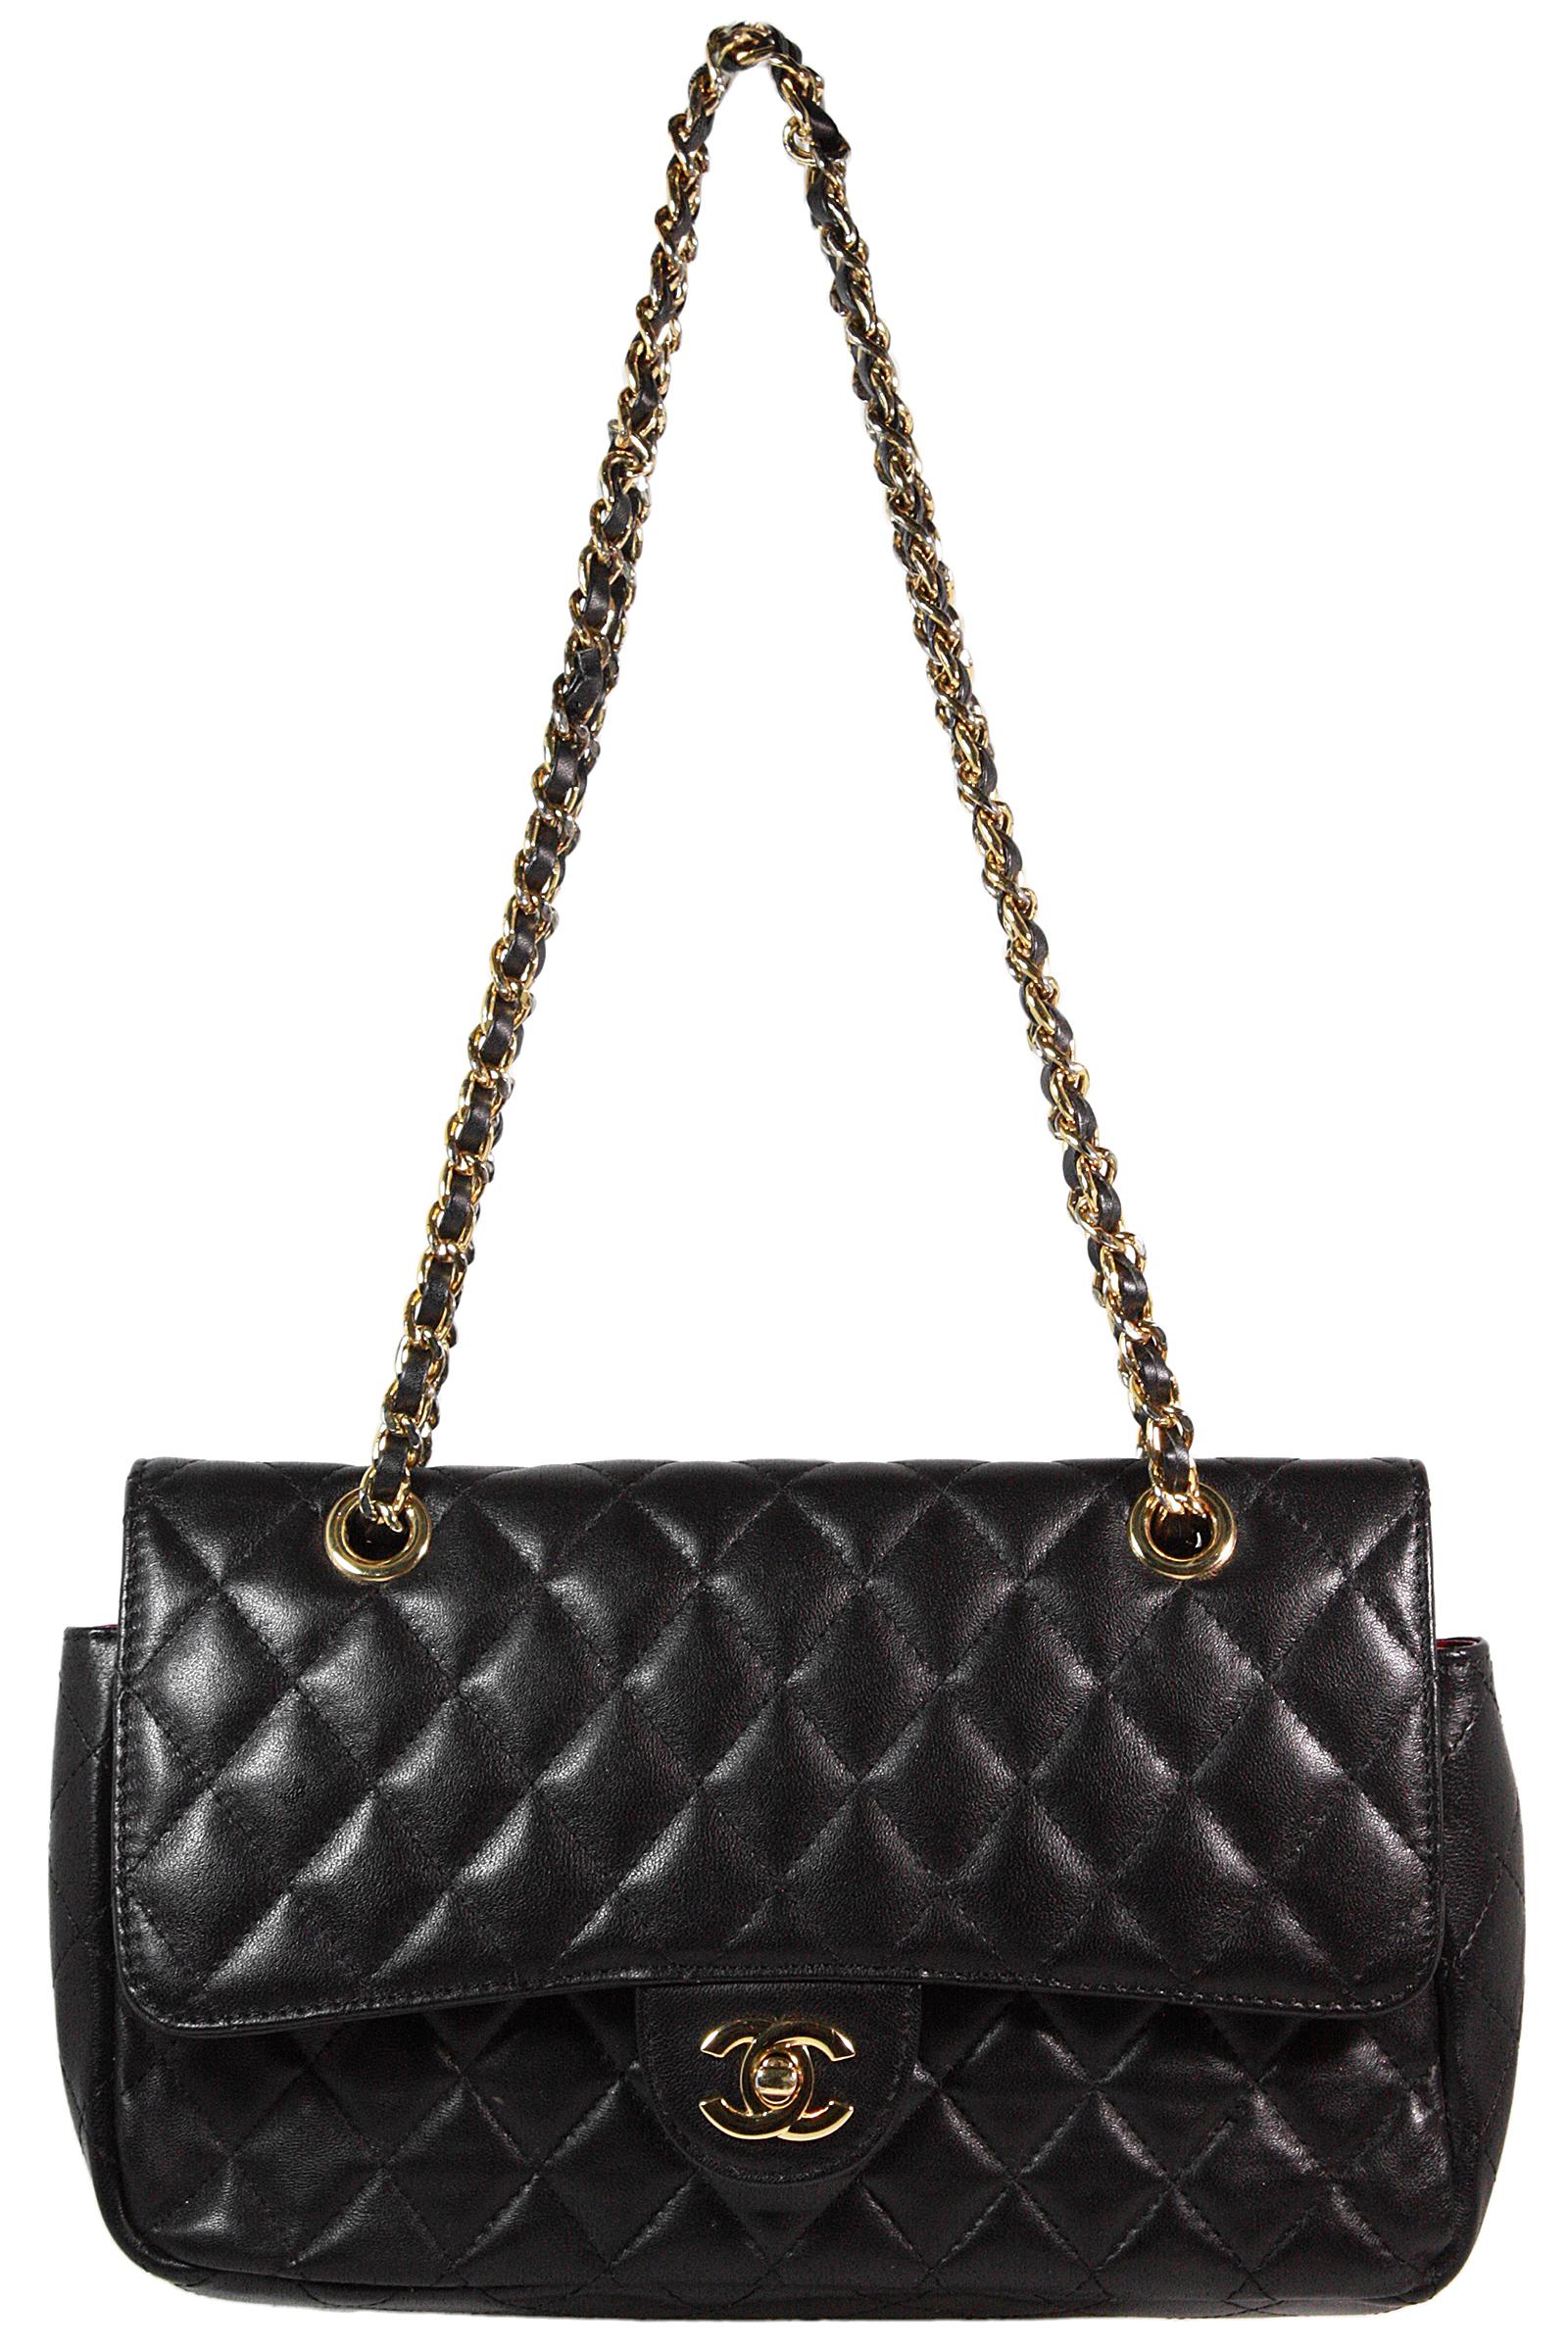 Chanel double strap bag
Made in France
Soft black quilted Lambskin leather 
Gold metal classic CC logo clasp
Inner snap pouch
Gold metal and threaded leather chain strap
Strap length as one chain: 40 inches
Double strap length: 24 inches
Red leather